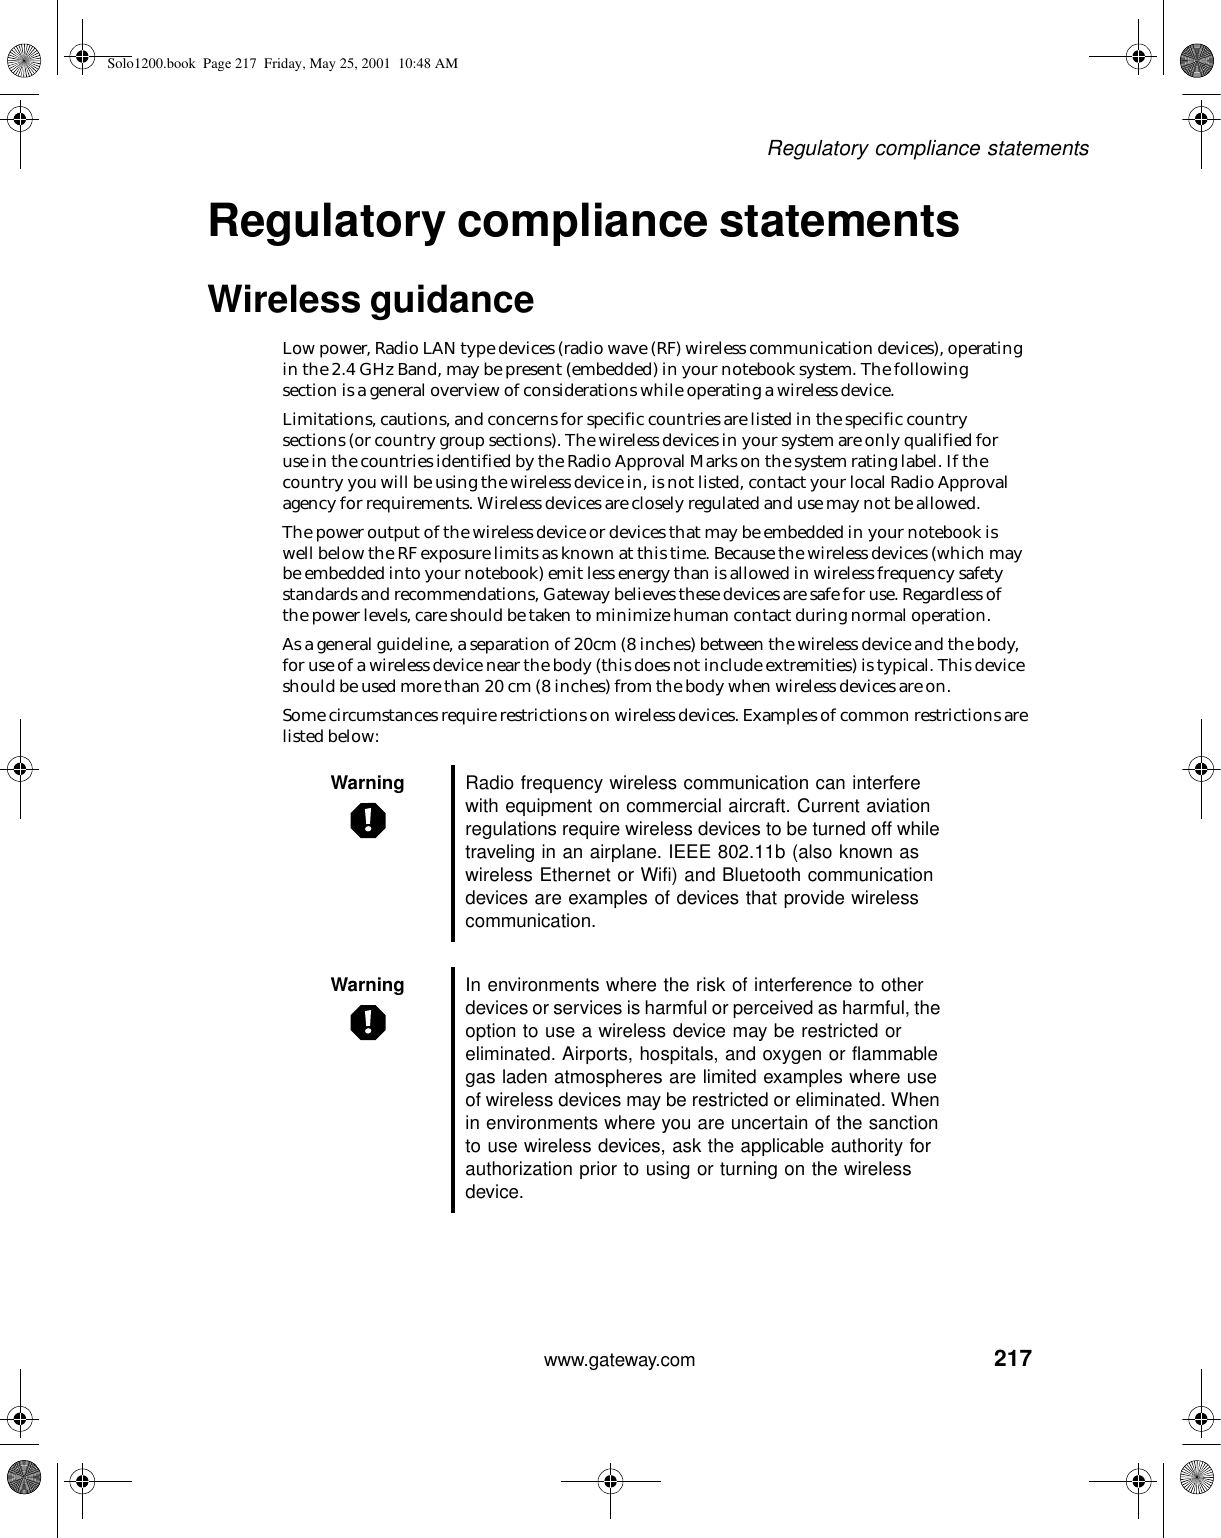 217Regulatory compliance statementswww.gateway.comRegulatory compliance statementsWireless guidanceLow power, Radio LAN type devices (radio wave (RF) wireless communication devices), operating in the 2.4 GHz Band, may be present (embedded) in your notebook system. The following section is a general overview of considerations while operating a wireless device.Limitations, cautions, and concerns for specific countries are listed in the specific country sections (or country group sections). The wireless devices in your system are only qualified for use in the countries identified by the Radio Approval Marks on the system rating label. If the country you will be using the wireless device in, is not listed, contact your local Radio Approval agency for requirements. Wireless devices are closely regulated and use may not be allowed.The power output of the wireless device or devices that may be embedded in your notebook is well below the RF exposure limits as known at this time. Because the wireless devices (which may be embedded into your notebook) emit less energy than is allowed in wireless frequency safety standards and recommendations, Gateway believes these devices are safe for use. Regardless of the power levels, care should be taken to minimize human contact during normal operation.As a general guideline, a separation of 20cm (8 inches) between the wireless device and the body, for use of a wireless device near the body (this does not include extremities) is typical. This device should be used more than 20 cm (8 inches) from the body when wireless devices are on.Some circumstances require restrictions on wireless devices. Examples of common restrictions are listed below:Warning Radio frequency wireless communication can interfere with equipment on commercial aircraft. Current aviation regulations require wireless devices to be turned off while traveling in an airplane. IEEE 802.11b (also known as wireless Ethernet or Wifi) and Bluetooth communication devices are examples of devices that provide wireless communication.Warning In environments where the risk of interference to other devices or services is harmful or perceived as harmful, the option to use a wireless device may be restricted or eliminated. Airports, hospitals, and oxygen or flammable gas laden atmospheres are limited examples where use of wireless devices may be restricted or eliminated. When in environments where you are uncertain of the sanction to use wireless devices, ask the applicable authority for authorization prior to using or turning on the wireless device.Solo1200.book Page 217 Friday, May 25, 2001 10:48 AM